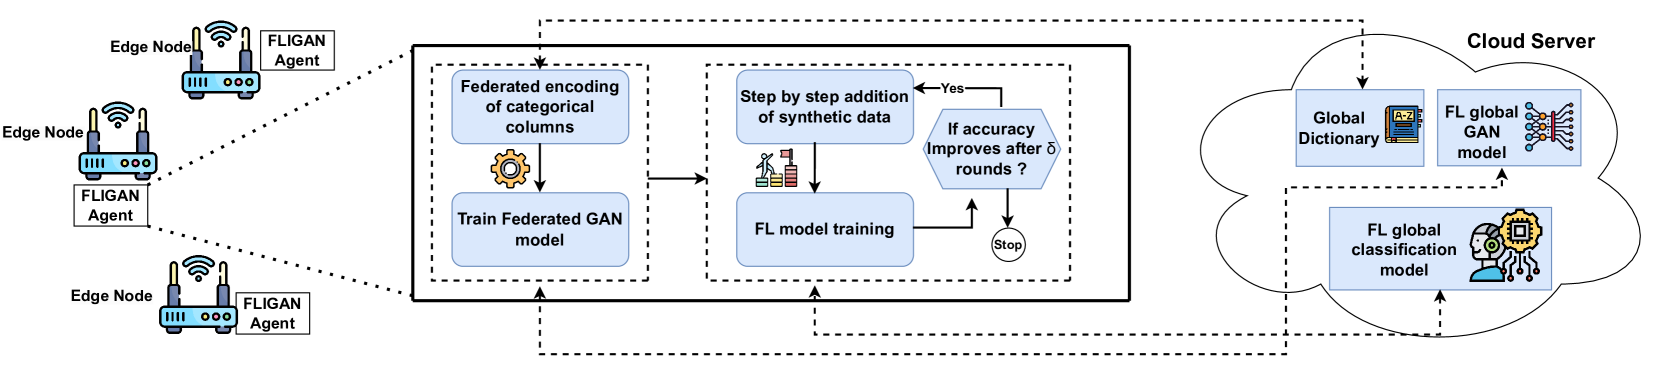 FLIGAN: Enhancing Federated Learning with Incomplete Data using GAN